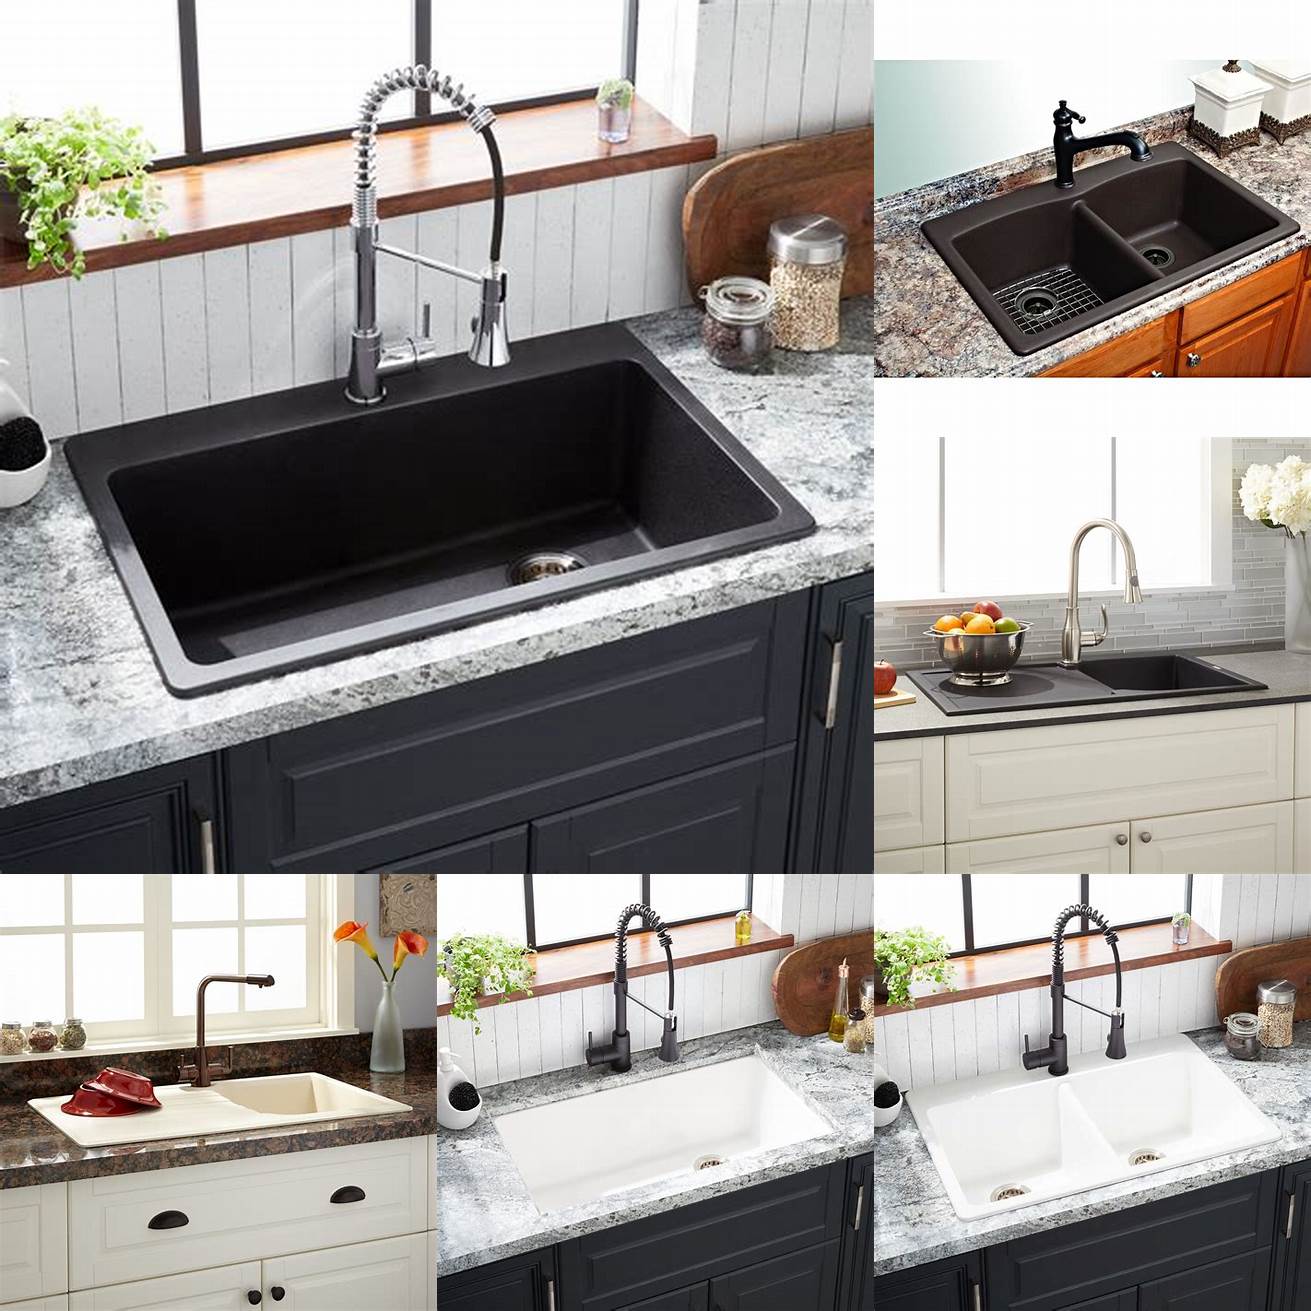 Image of a composite kitchen sink with a granite countertop